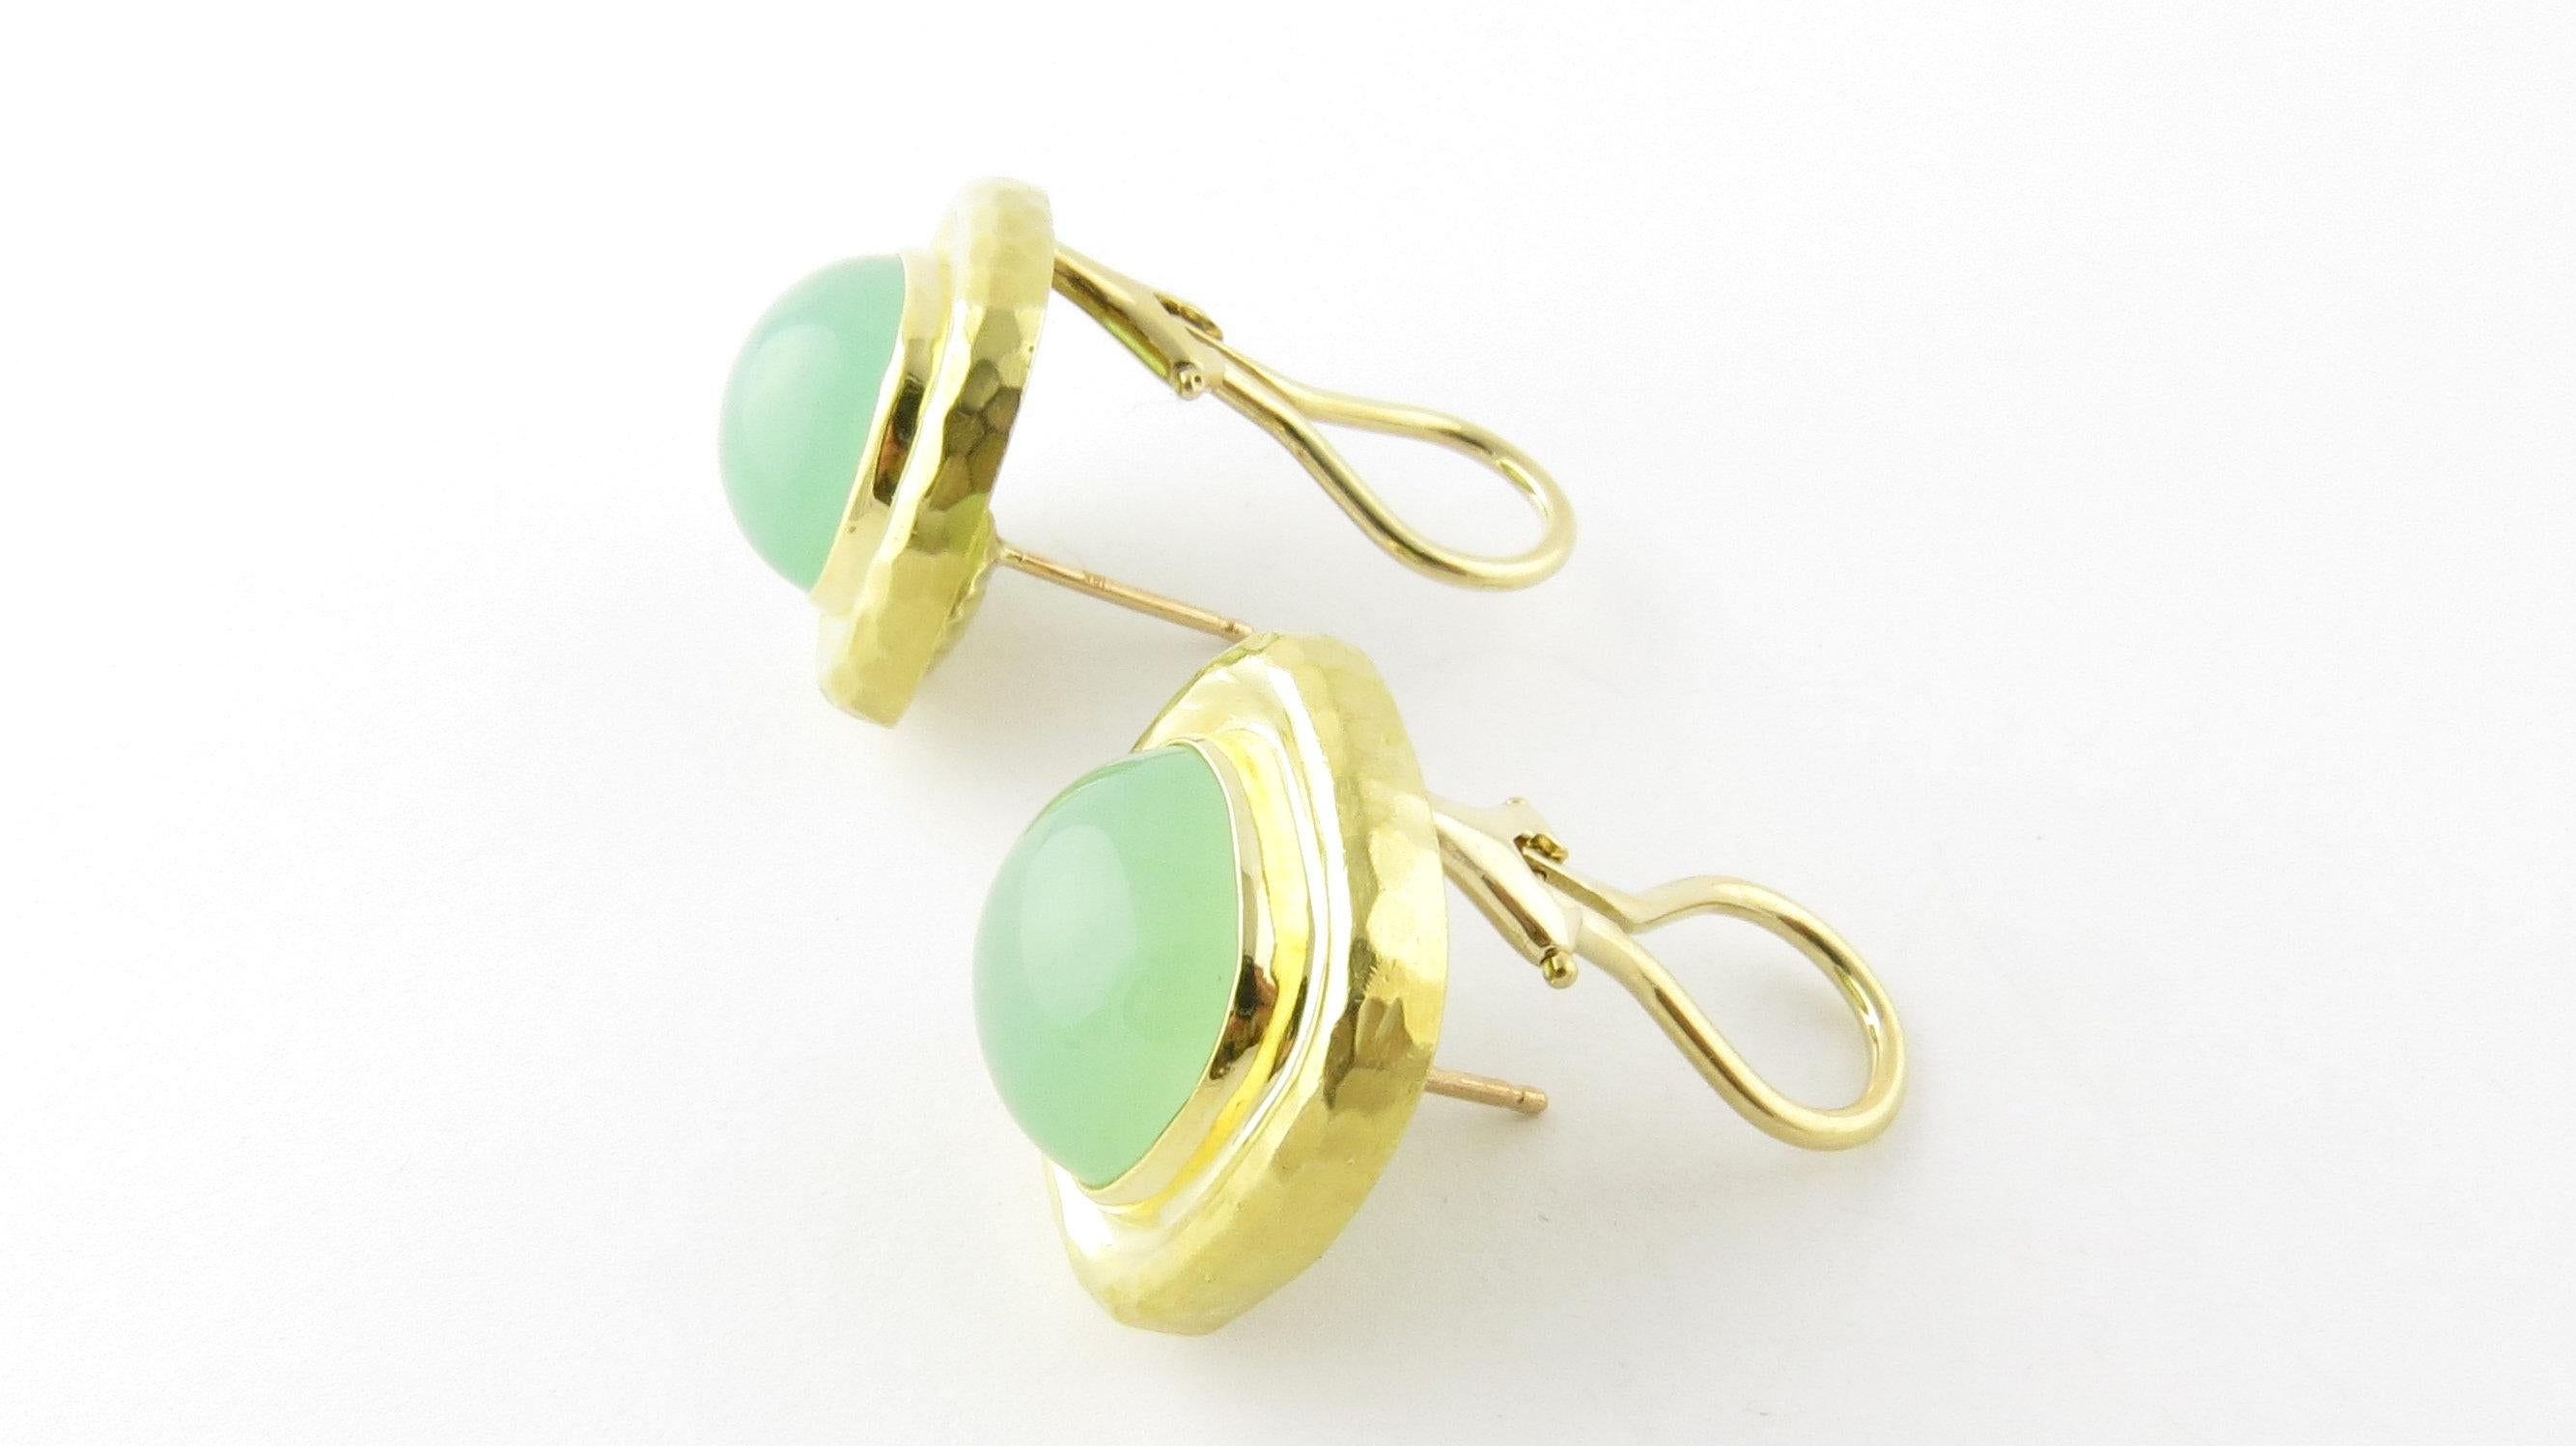 Vintage 18 Karat Yellow Gold and Jade MAZ Earrings- 
These stunning designer earrings each features one jade gemstone (12 mm x 12 mm) set in beautifully detailed 18K yellow gold. Hinge back closures. 
Size: 18 mm x 18 mm (actual charm) 
Weight: 9.0